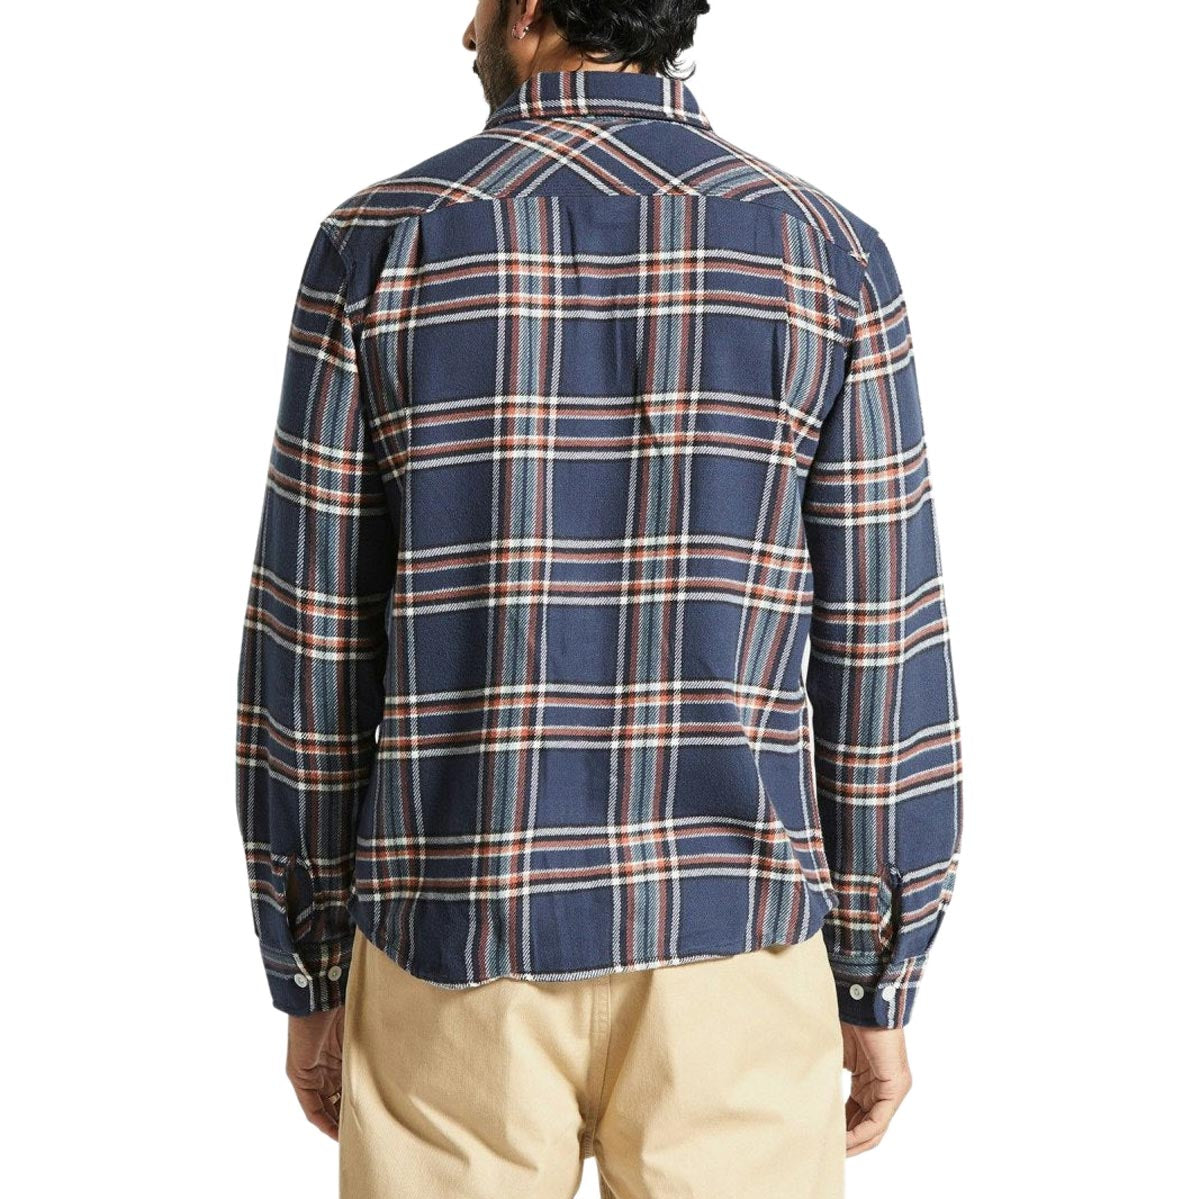 Brixton Bowery Flannel Long Sleeve Shirt - Washed Navy/Off White/Terracot image 2